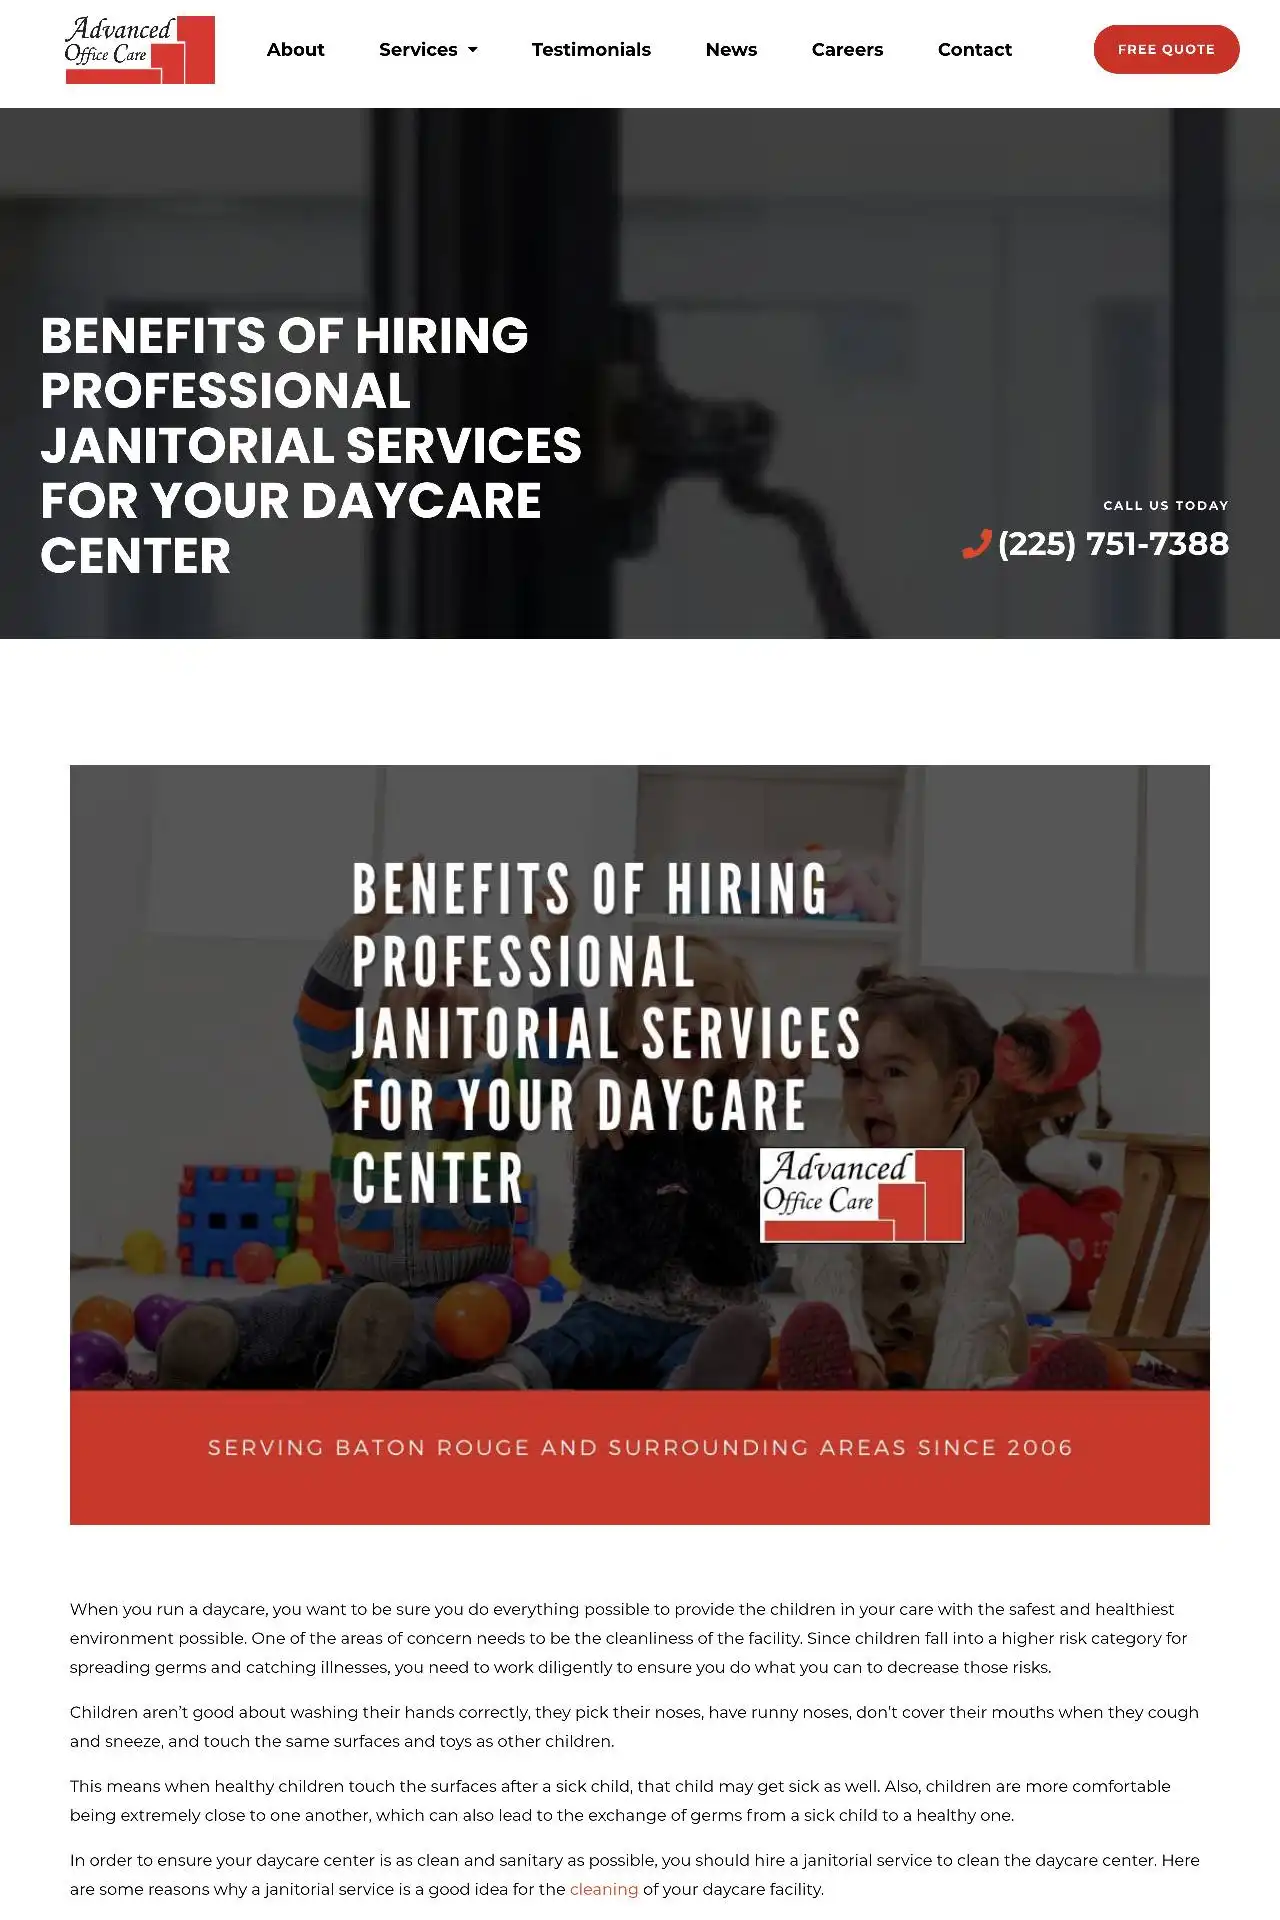 baton rouge cleaning company website design development https aocla.com cleaning benefits of hiring professional janitorial services for your daycare center